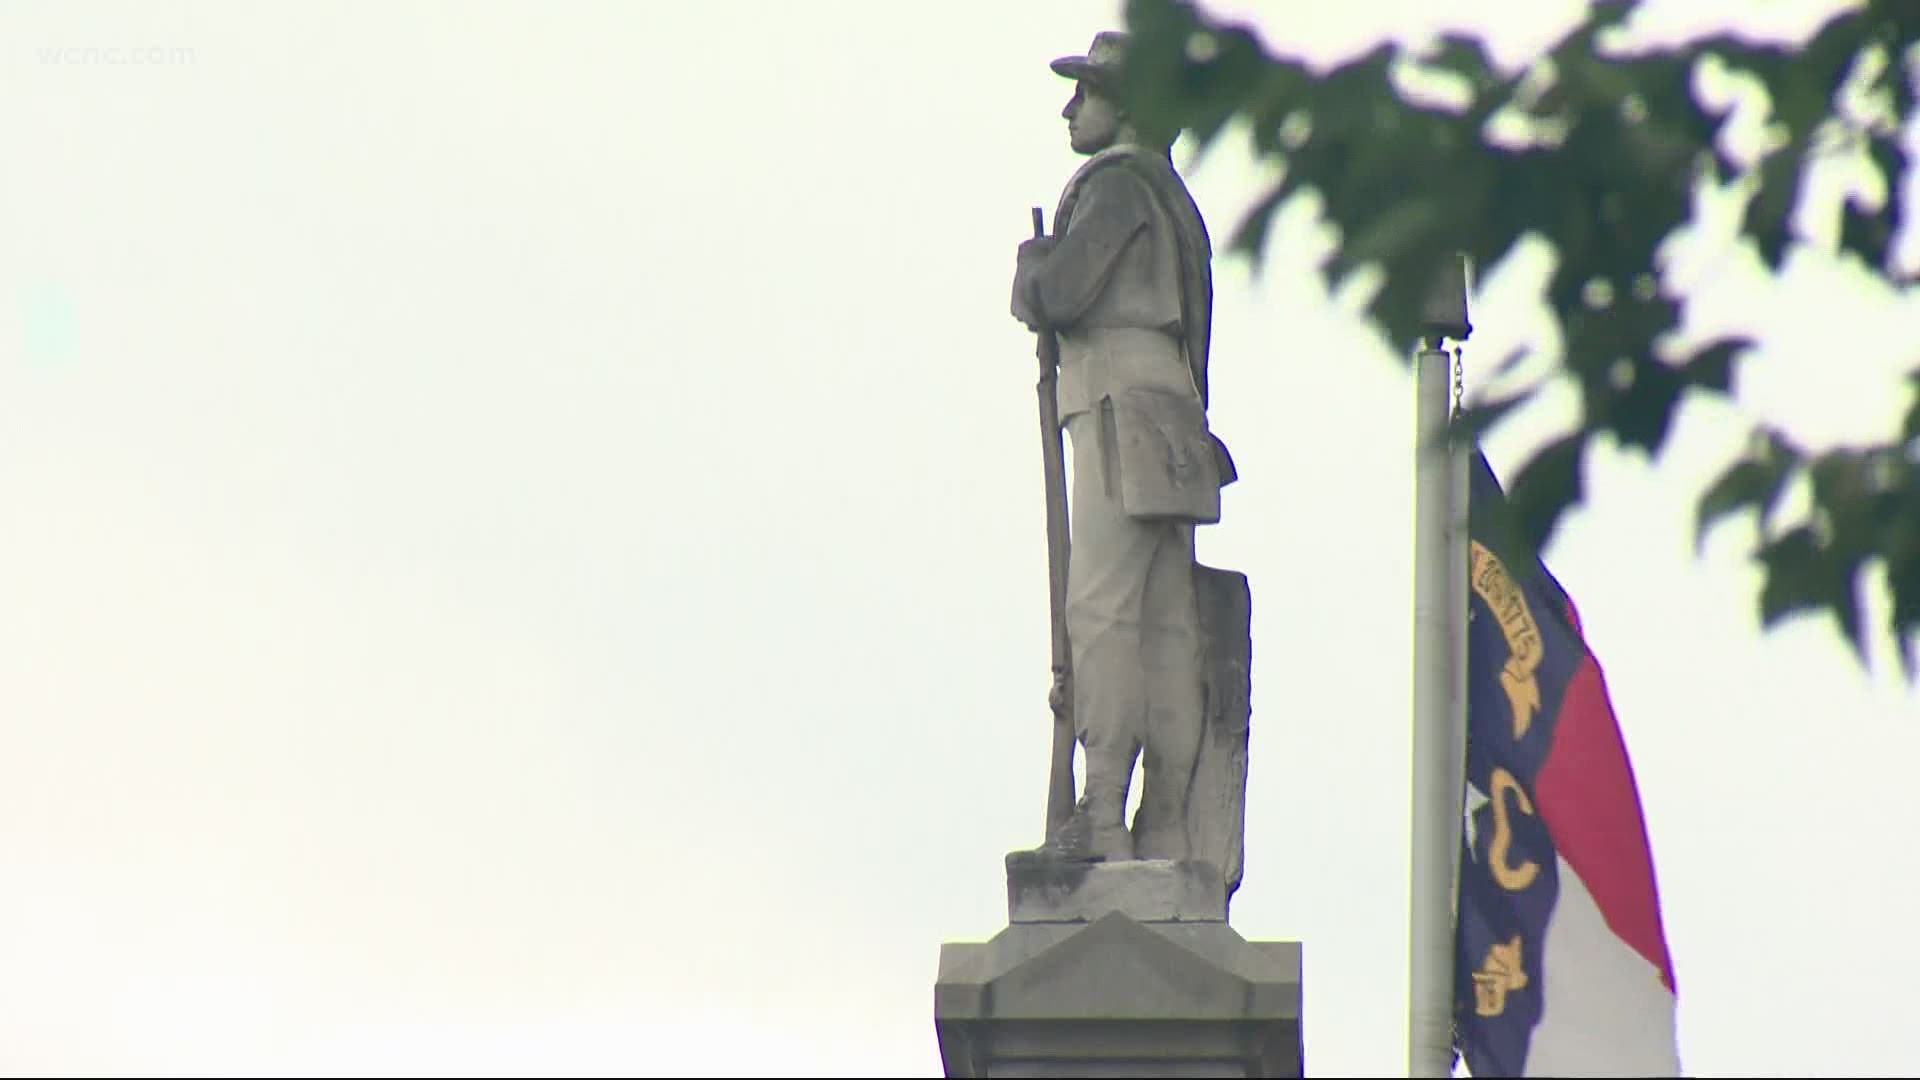 Monday night, Gaston County leaders decided the fate of a Confederate monument outside the county courthouse.